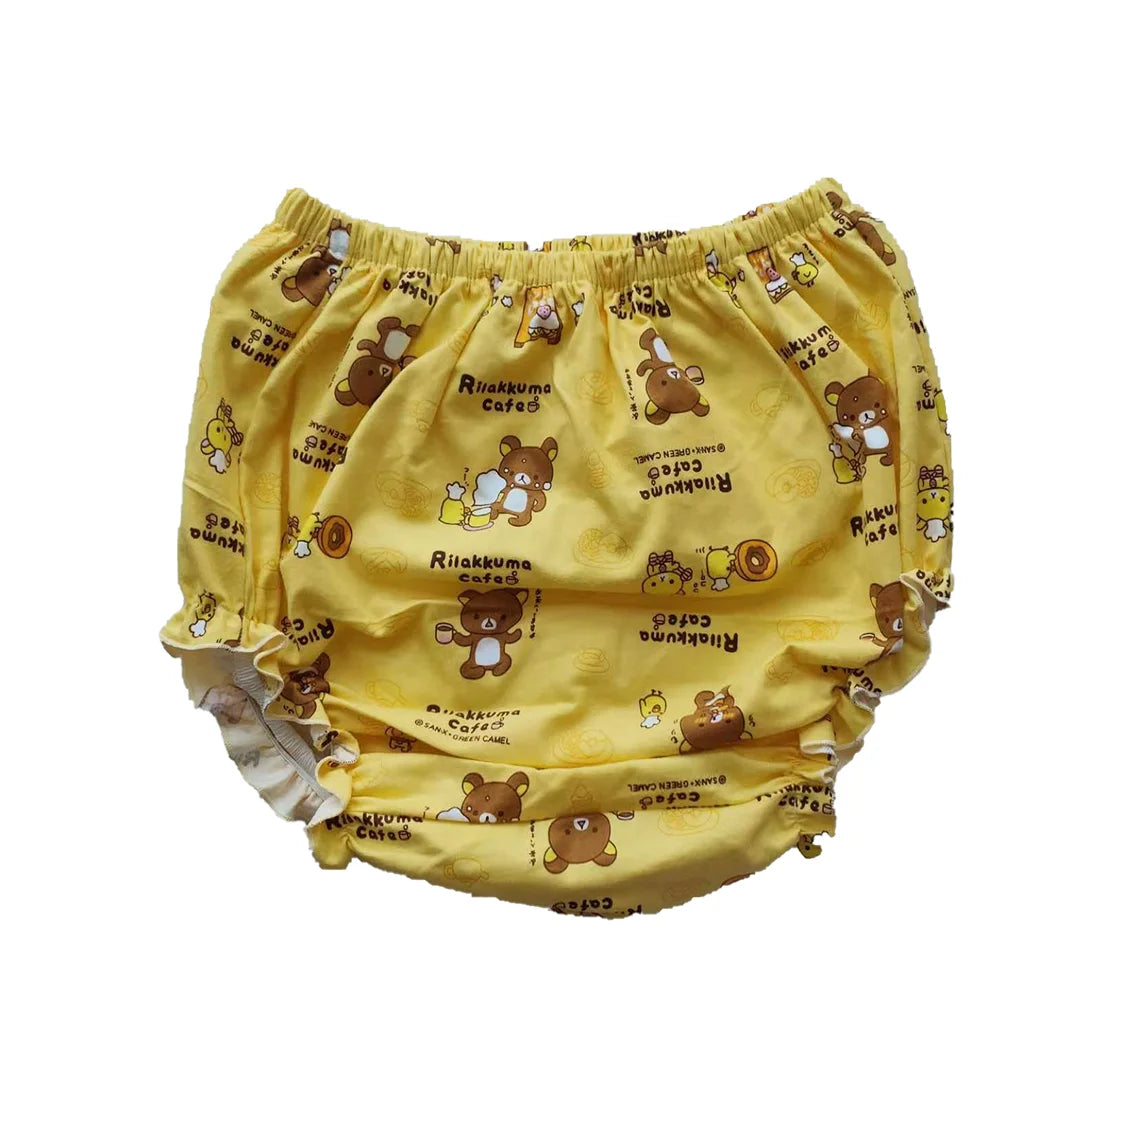 SnuggleBums Yellow Bear Print Pull-on Cotton Flannel Pants - ABDL Adult Incontinence Comfort!